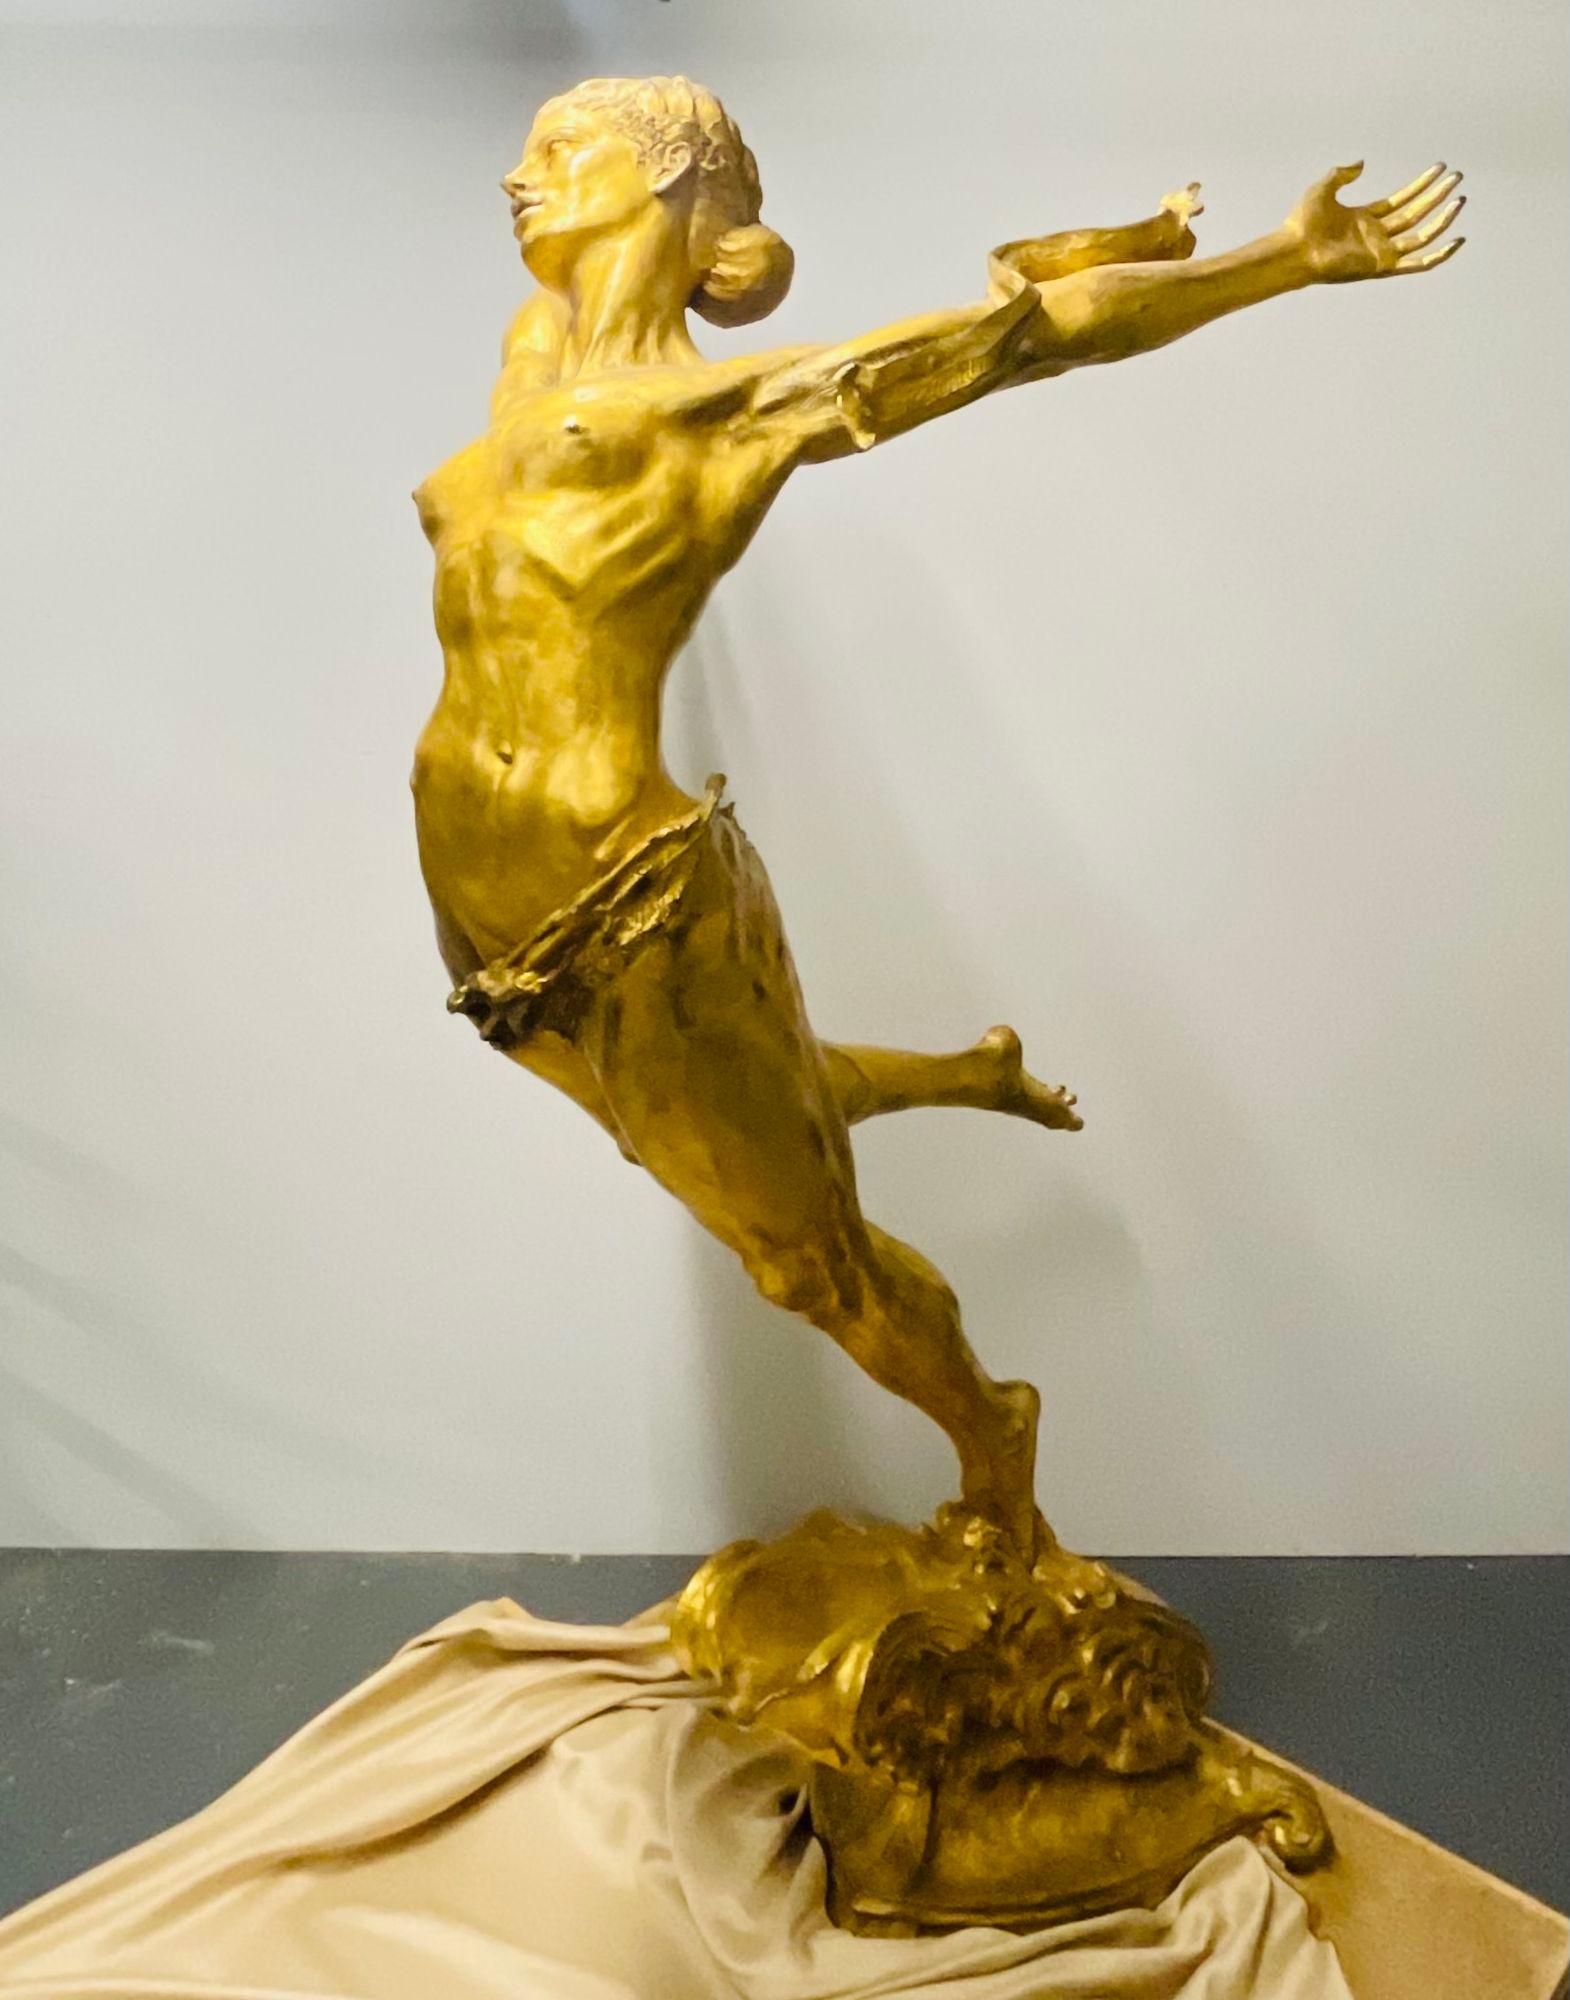 Dore Bronze 'Olympic Woman' Sculpture Depicting Woman's Empowerment Originally Commissioned by Avon Products as an exhibit for the 1996 Olympics 

Famed Sculpturer Greg Wyatt's Larger than Life Sculpture of a soaring gilt bronze woman striving to